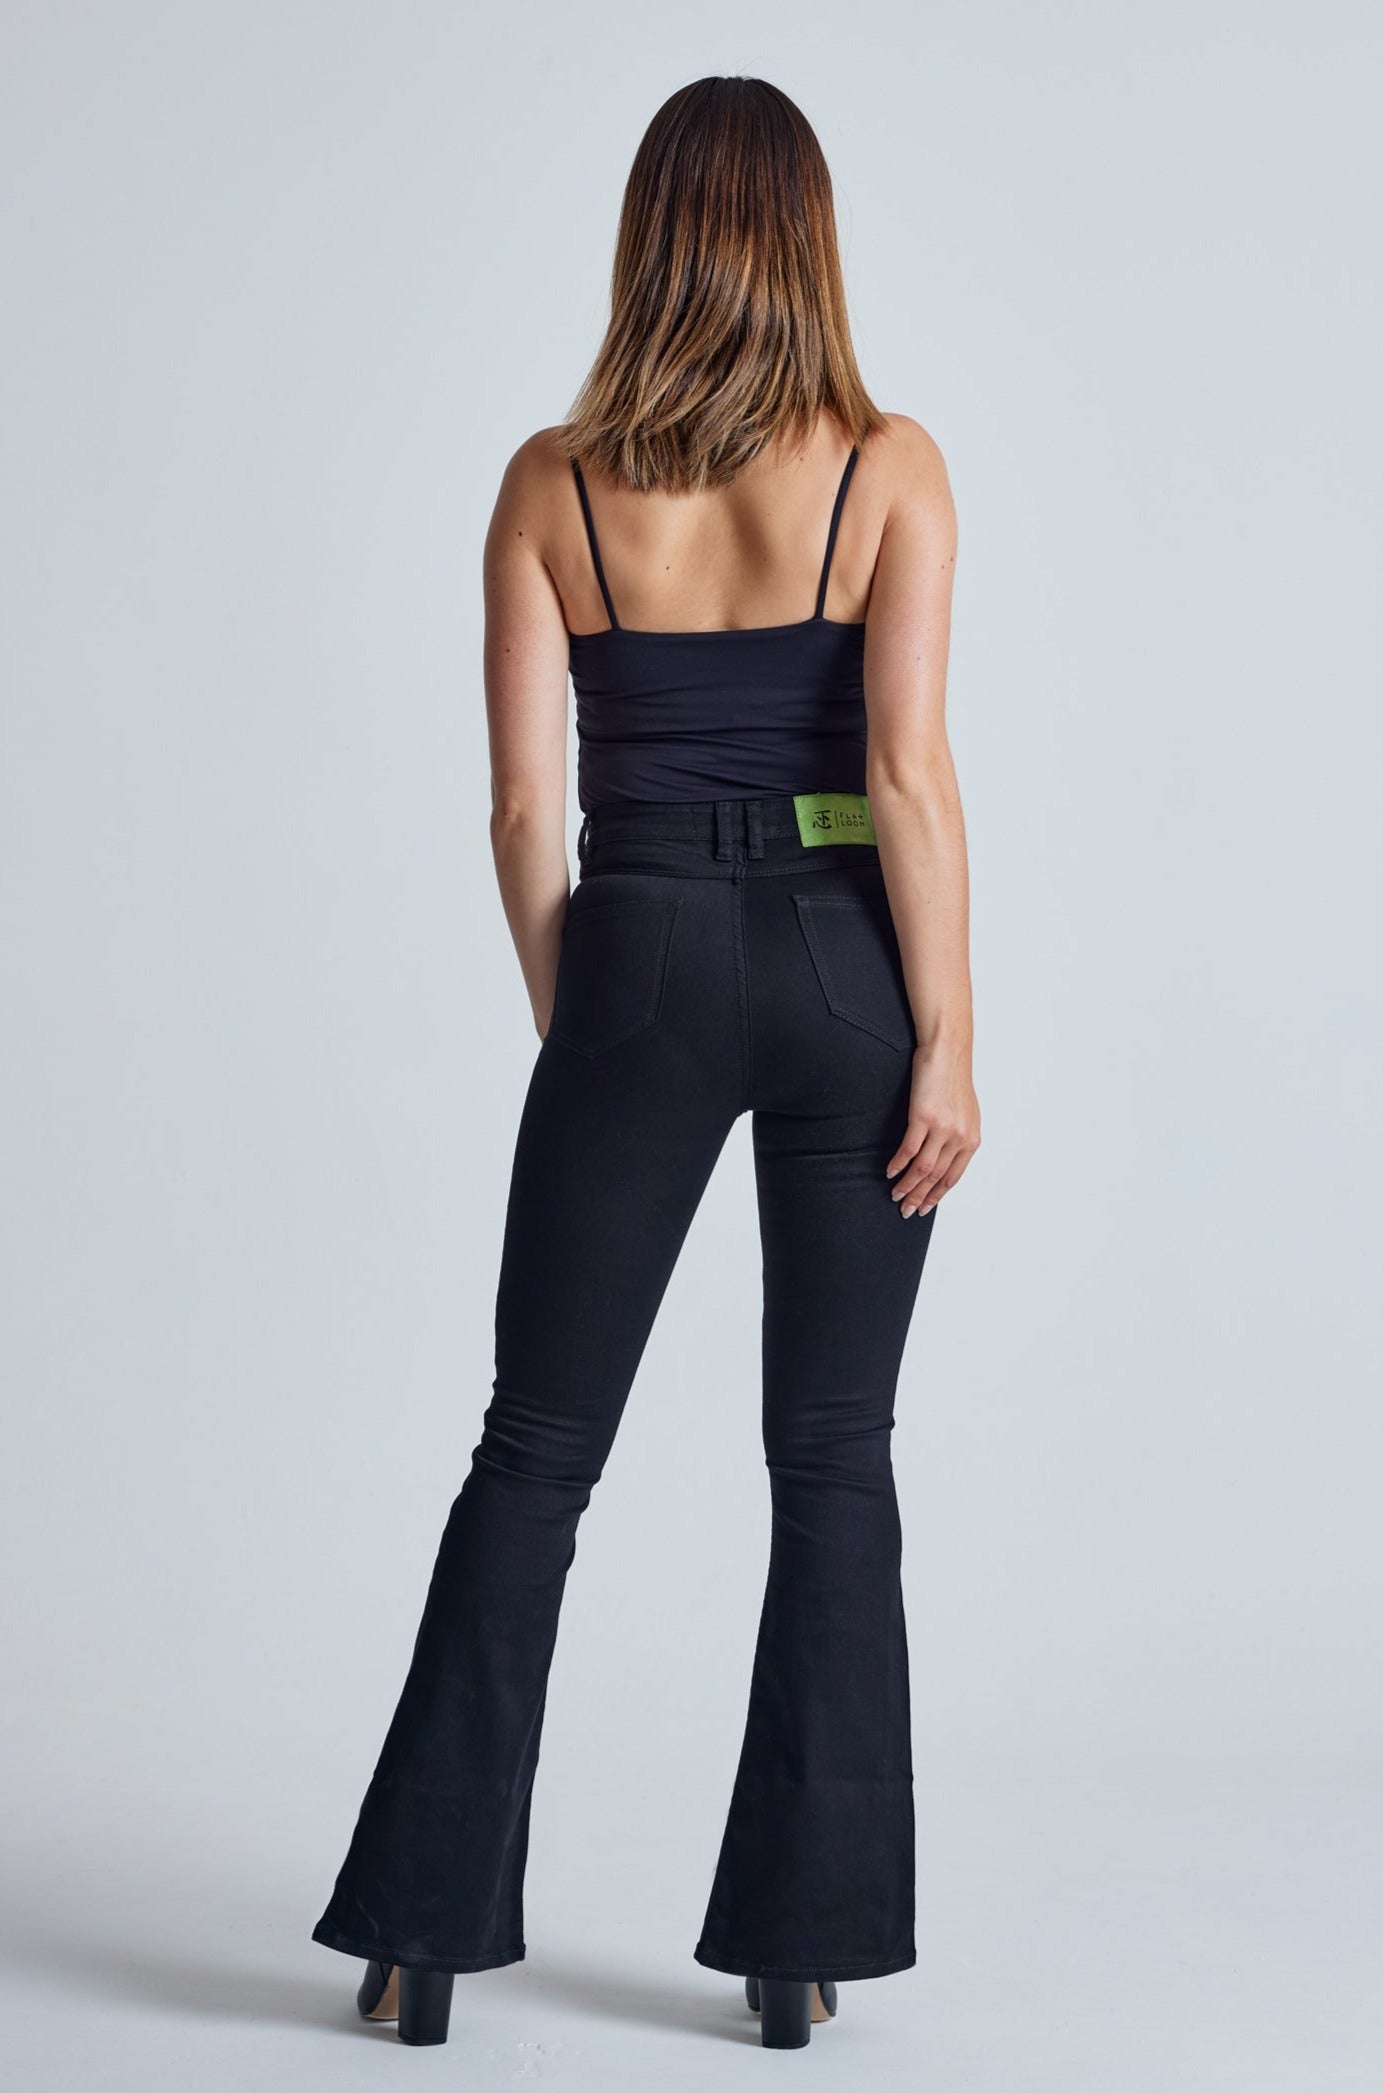 Ebony Mavis High Waisted Skinny Flared Jeans - GOTS Certified Organic Cotton and Recycled Polyester